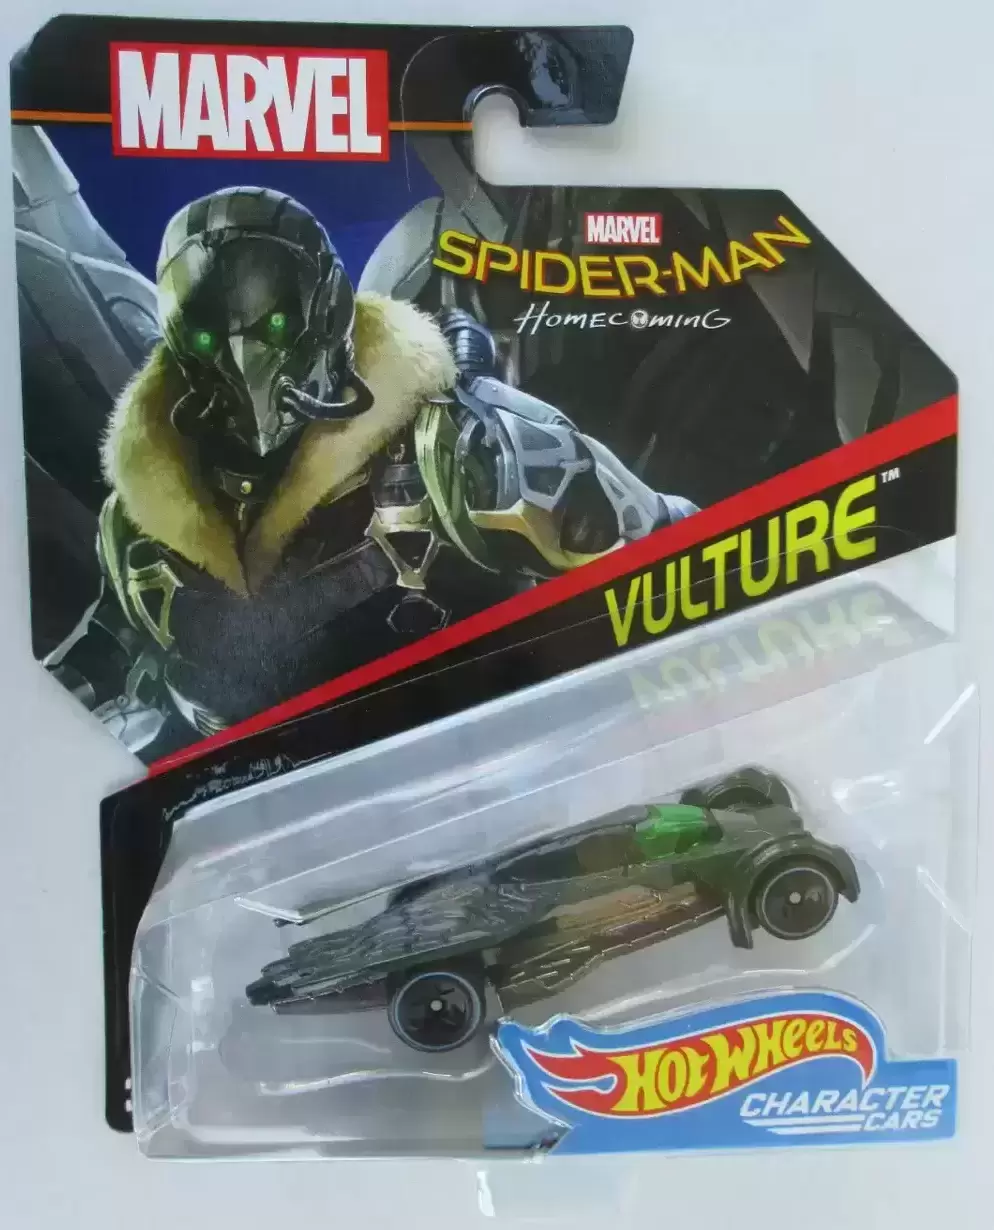 Marvel Character Cars - Spider-Man Homecoming - Vulture